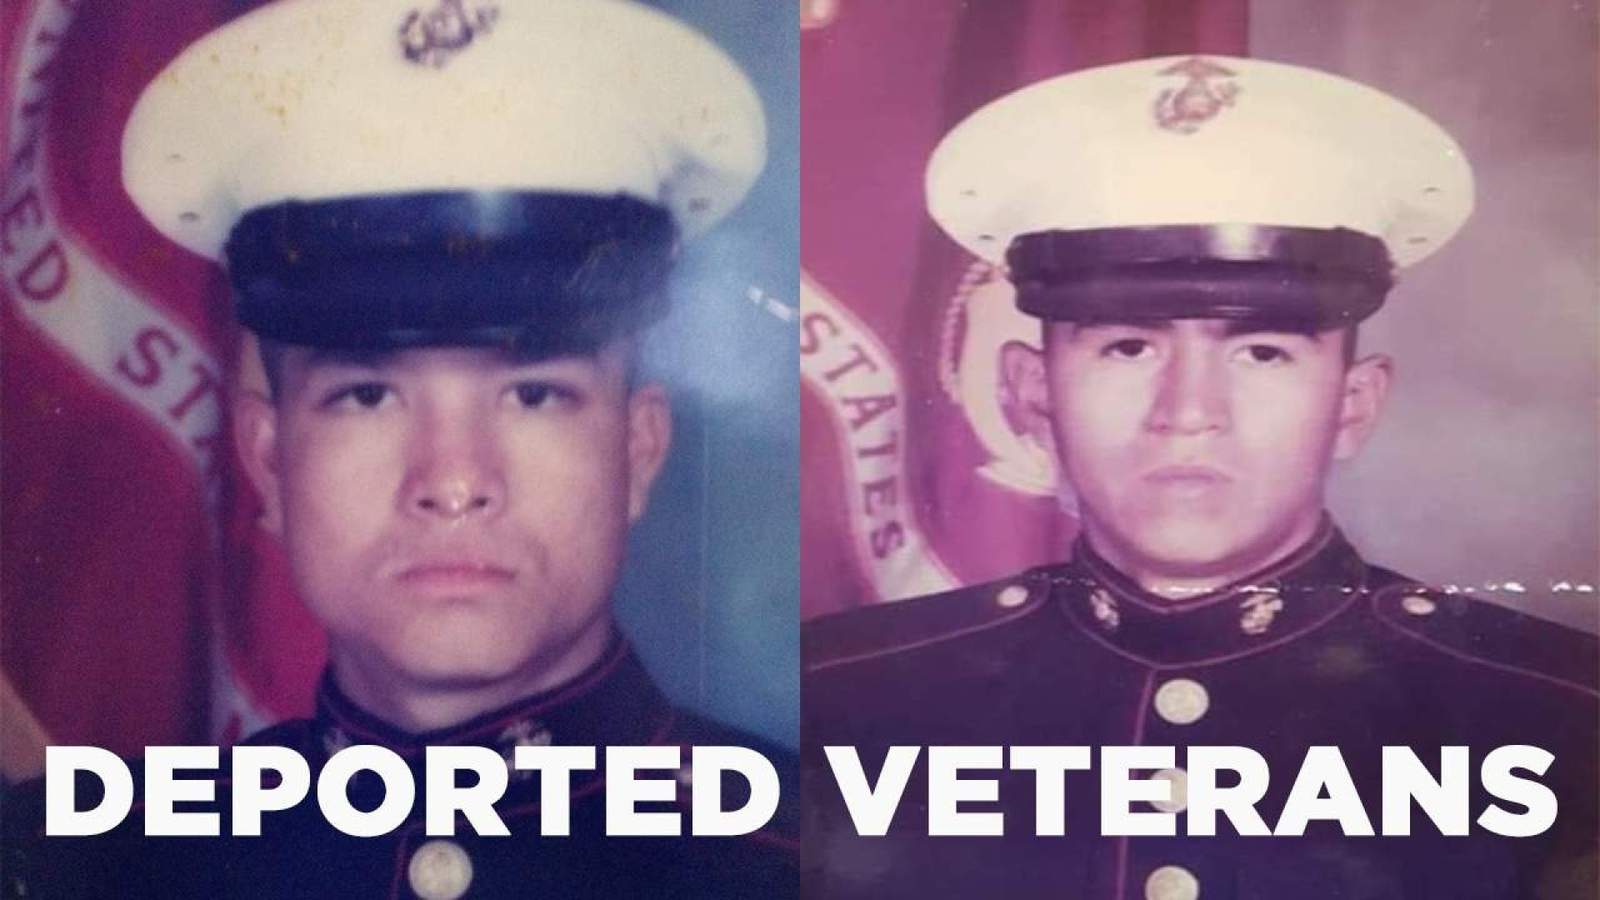 ‘I feel betrayed’: Undocumented veterans share stories of deportation, running from immigration agents